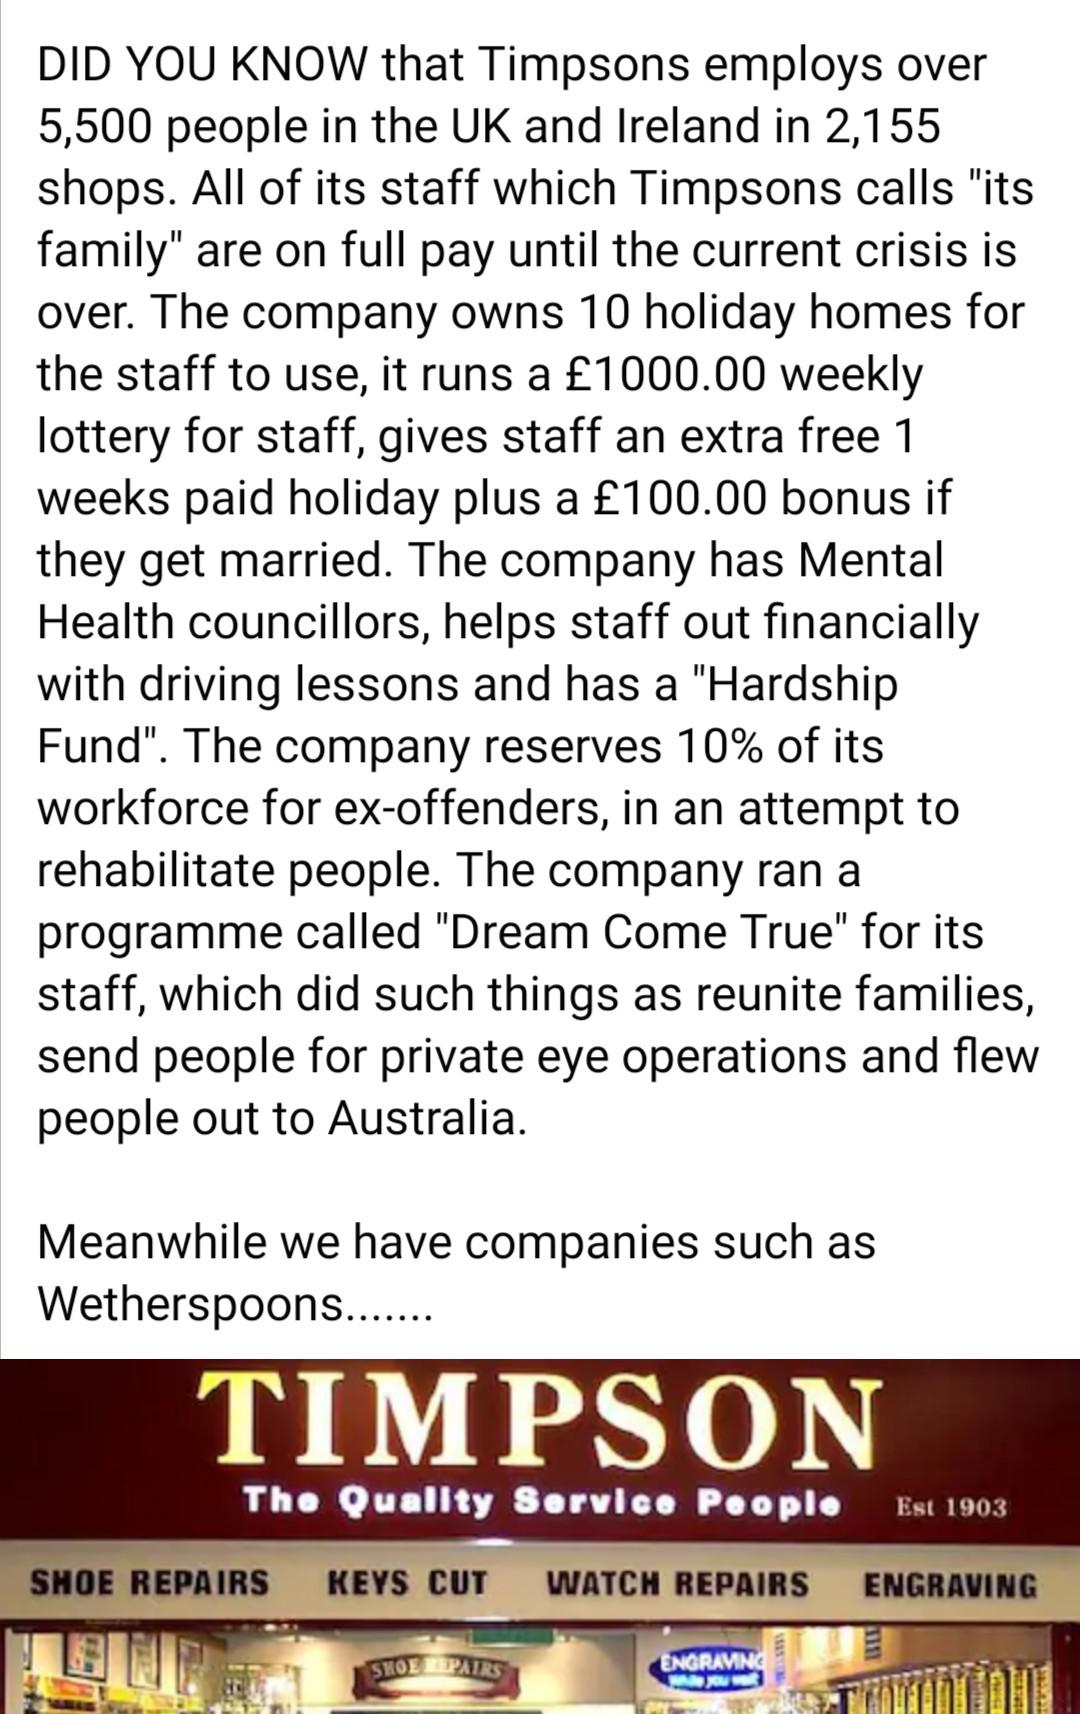 Did You Know that Timpsons employs over 5,500 people in the Uk and Ireland in 2,155 shops. All of its staff which Timpsons calls "its family" are on full pay until the current crisis is over. The company owns 10 holiday homes for the staff to use, it runs